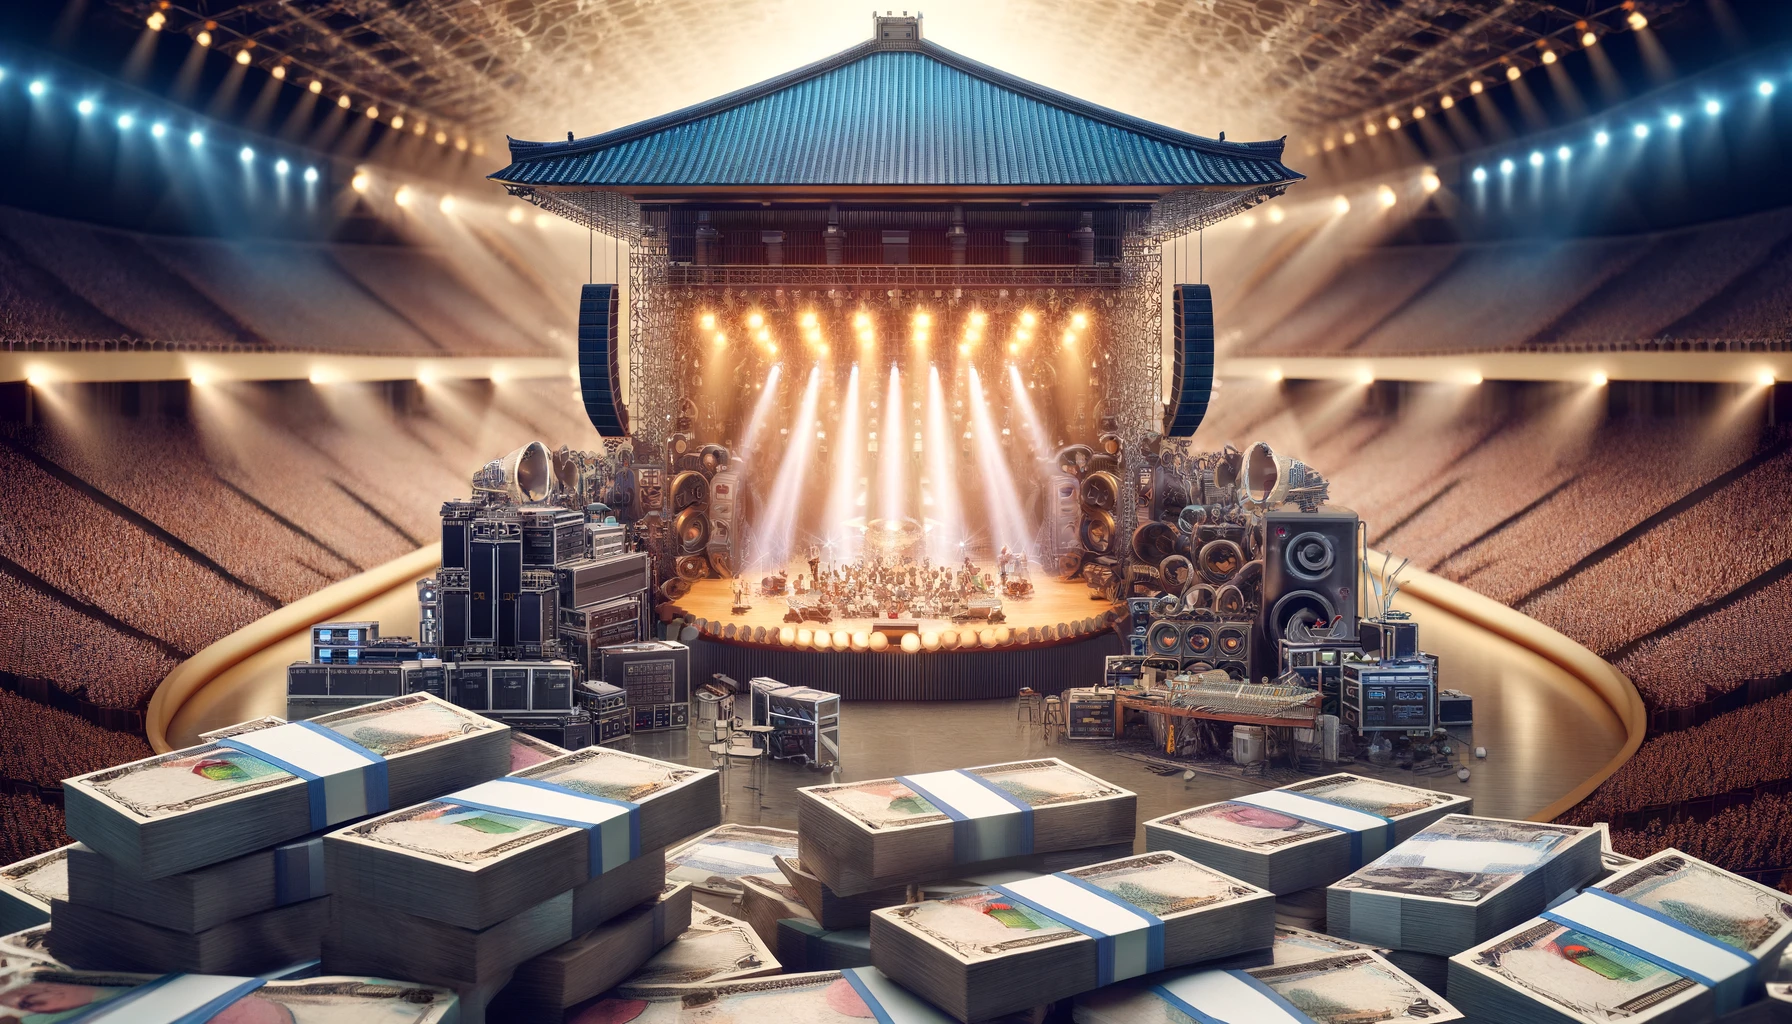 A conceptual image illustrating the high costs and value of hosting a live concert at the Budokan arena in Tokyo, Japan. The image shows a detailed, artistic juxtaposition of large stacks of Japanese yen notes and expensive concert equipment like lighting rigs, sound systems, and musical instruments on the stage. The background features the iconic Budokan arena, filled with an eager audience. The overall scene conveys the magnitude of investment and the electric atmosphere of a high-stakes concert, depicted in a wide 16:9 format.